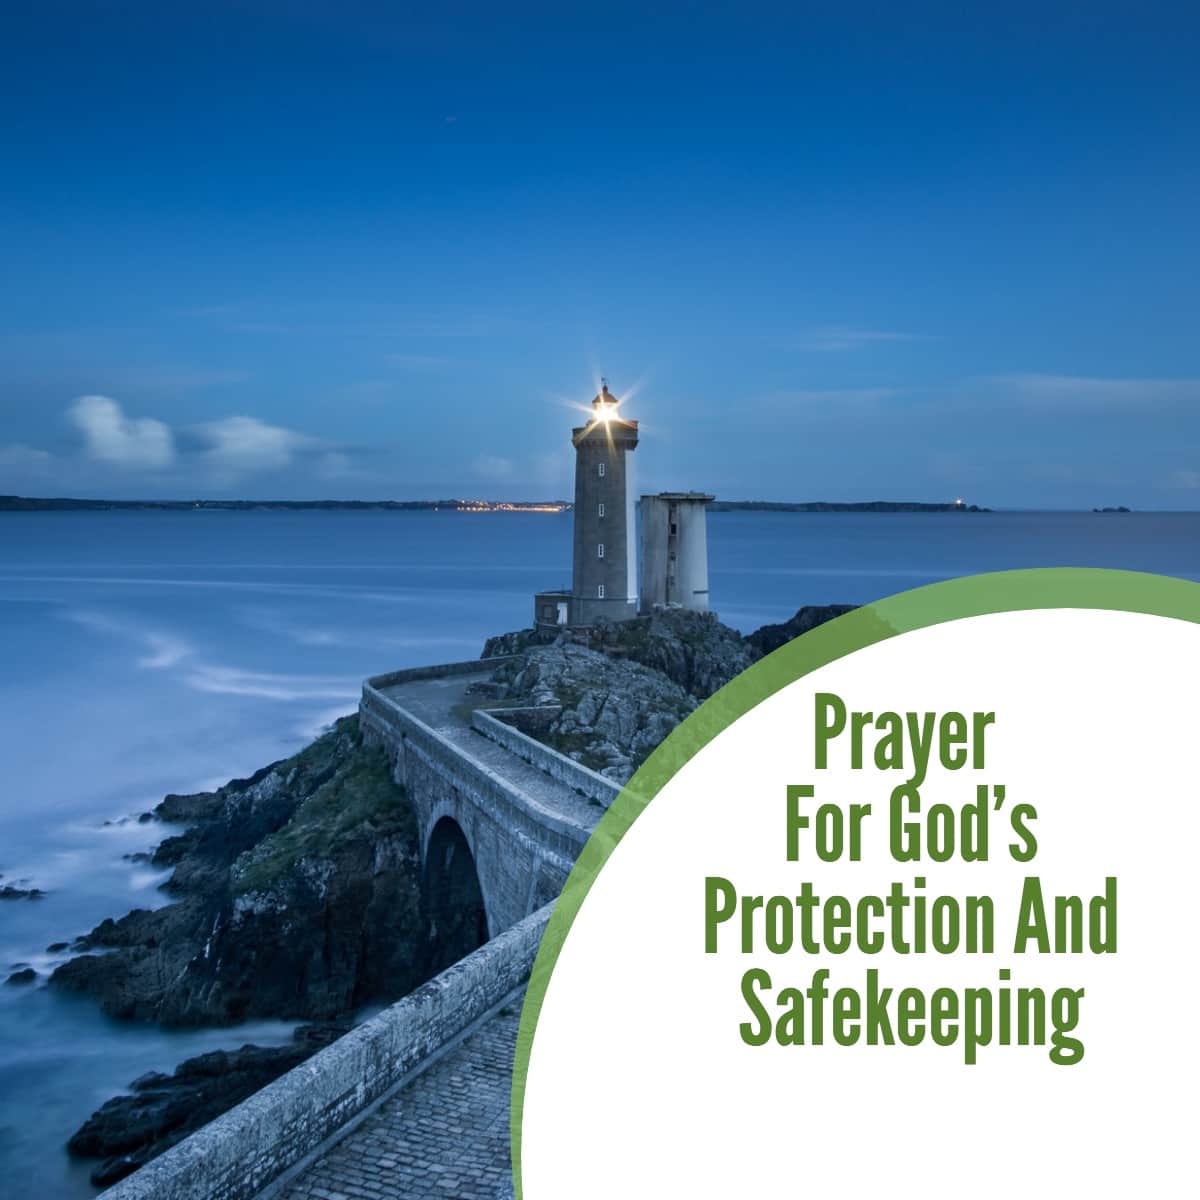 Prayer For God’s Protection And Safekeeping